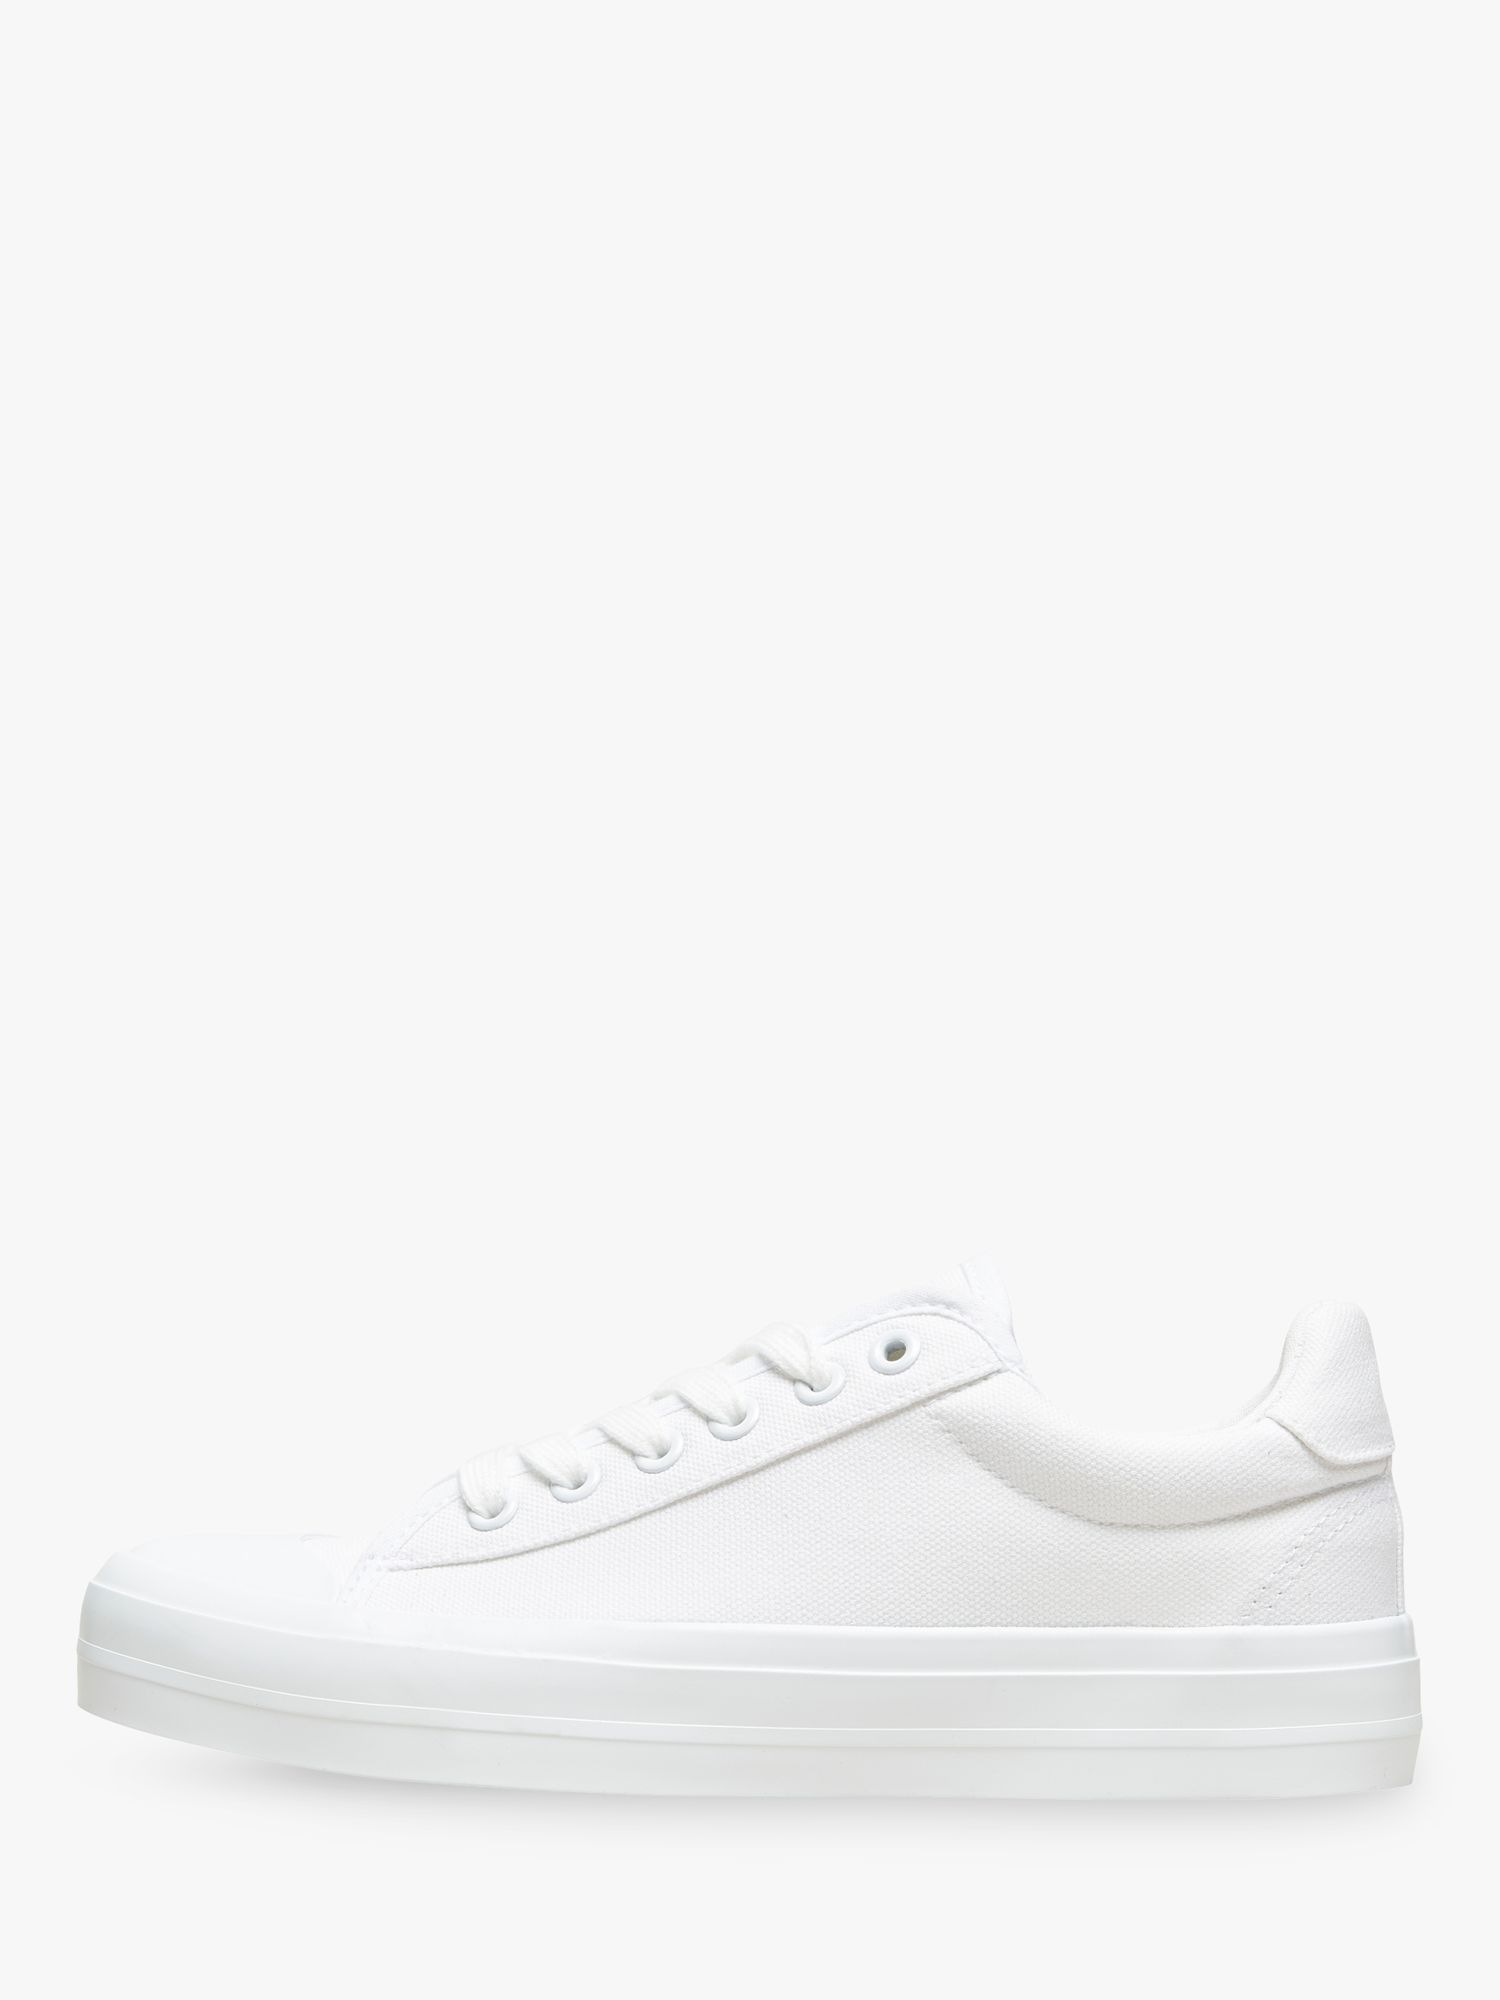 Selected Femme Simone Canvas Trainers, White